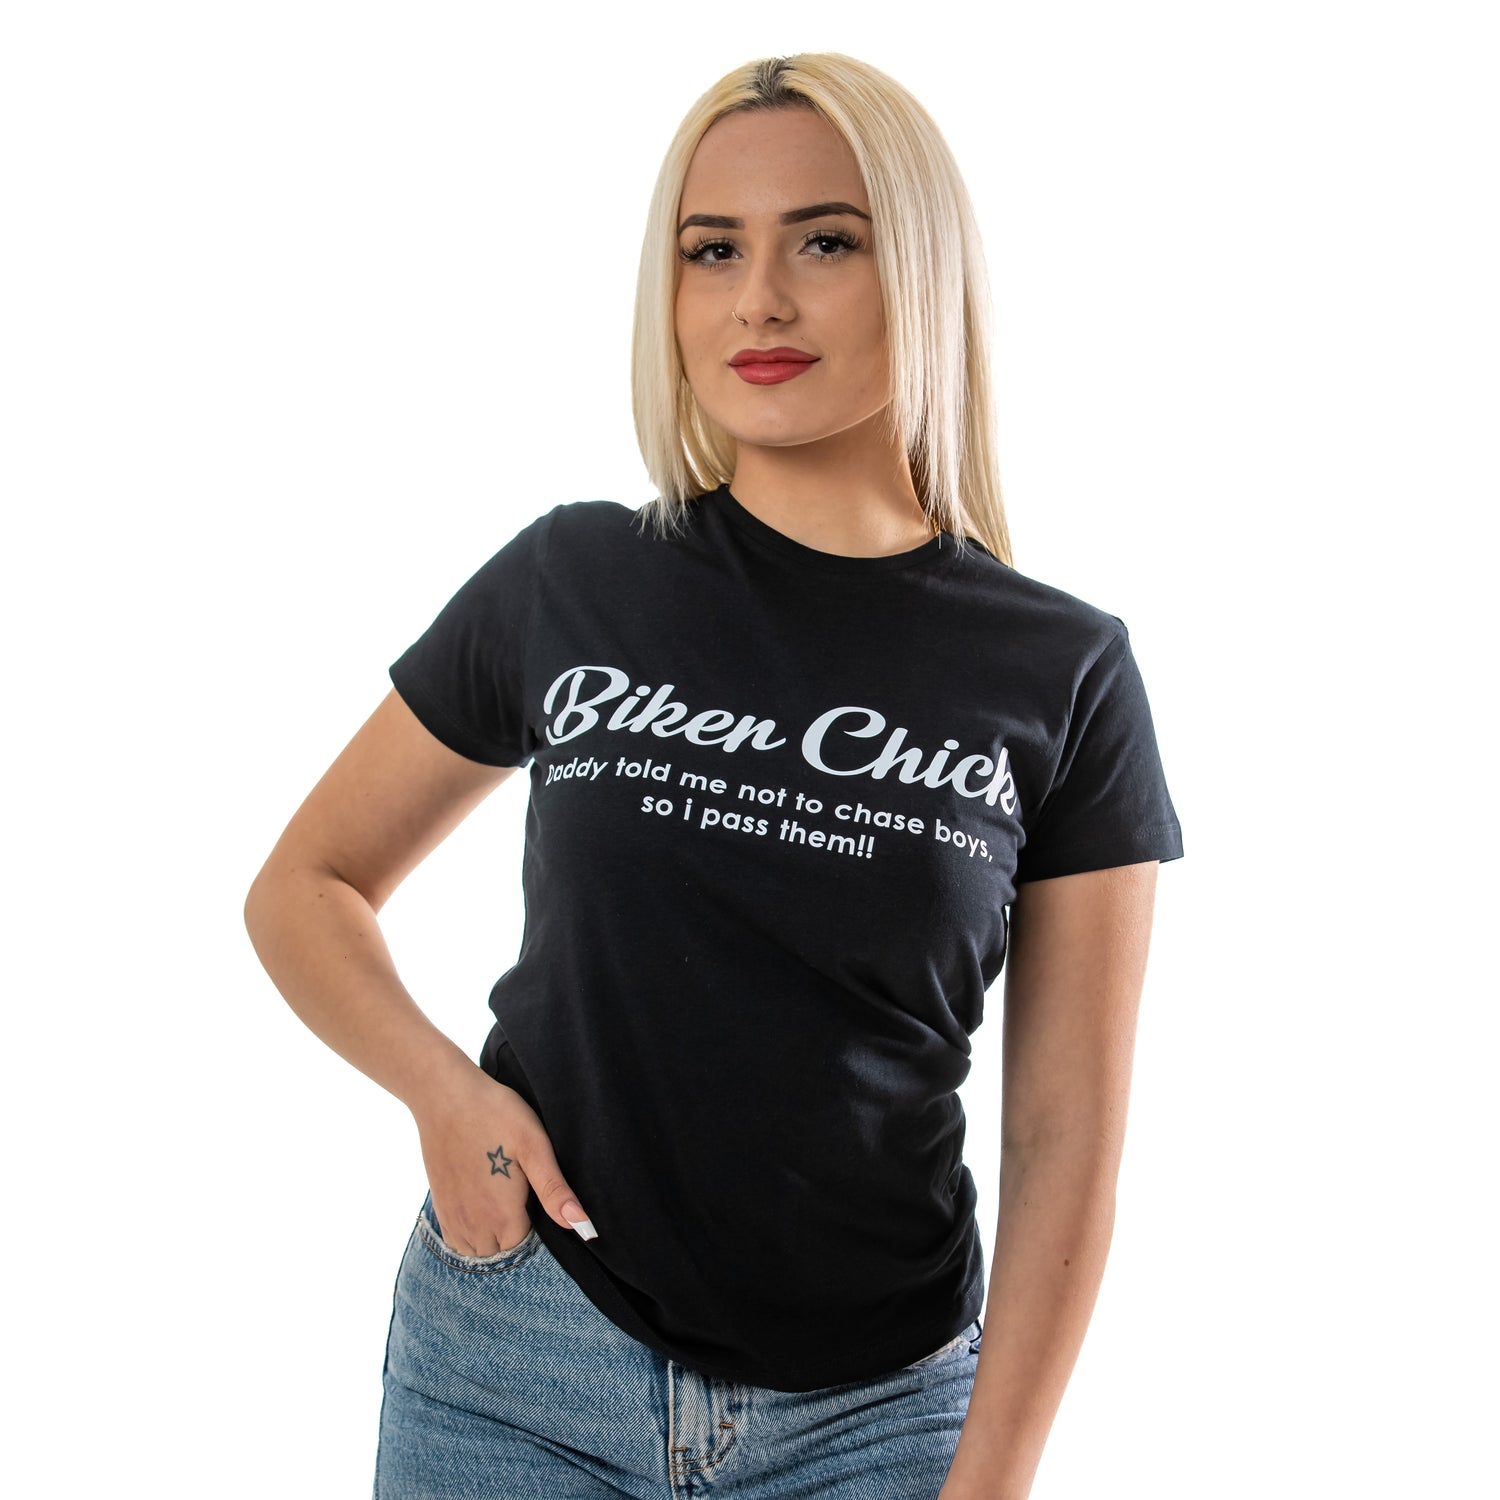 BKMZ Biker Chick T-Shirt - Daddy told me not to chase boys so i pass them